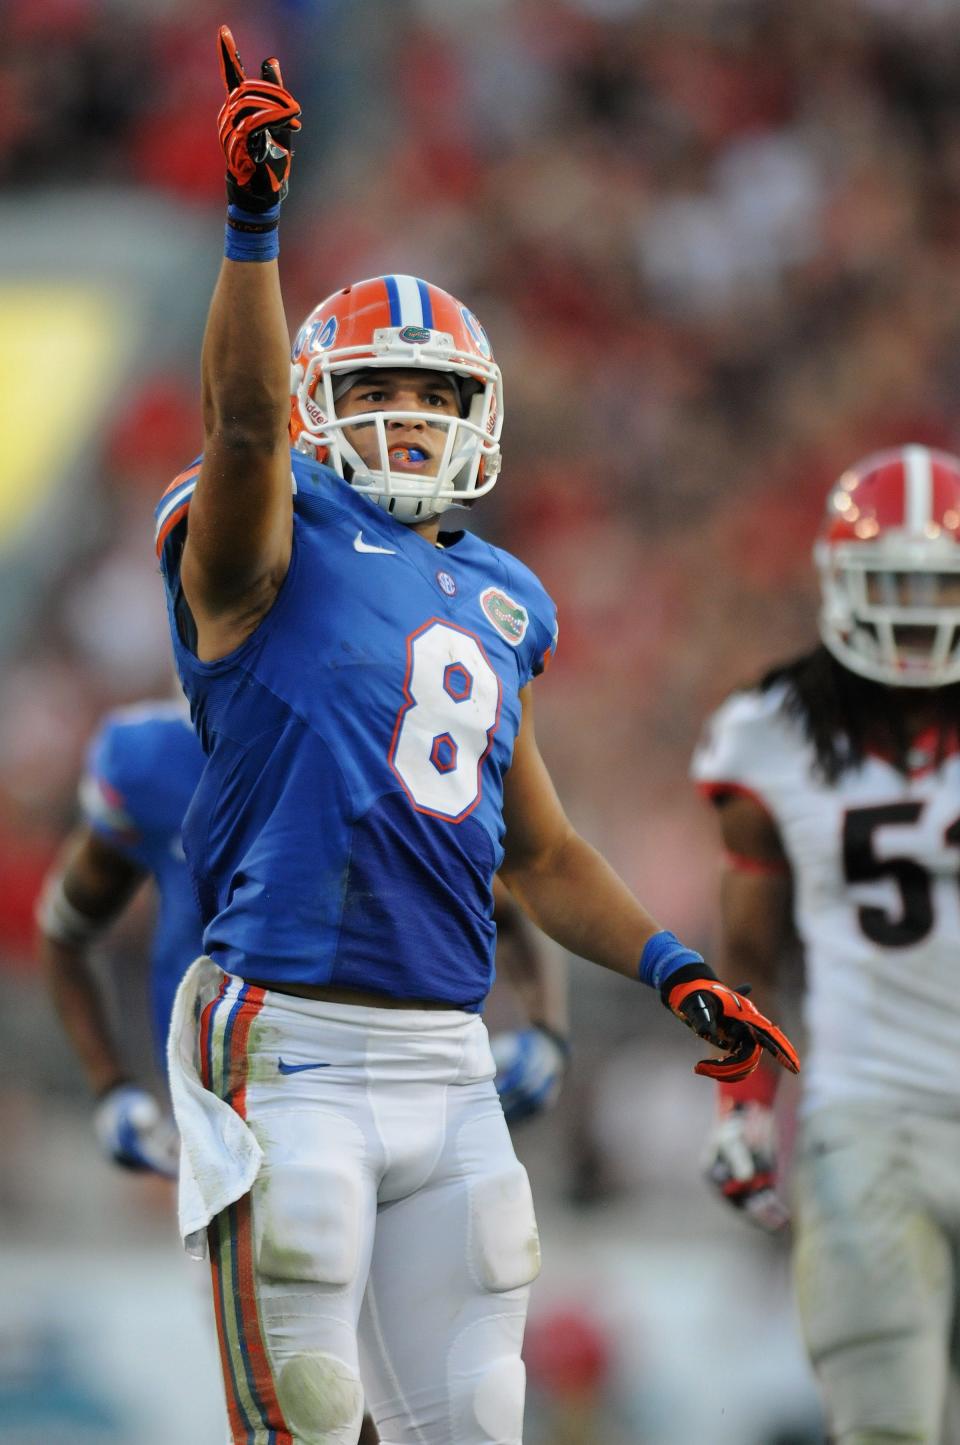 Trey Burton celebrates a first down for the Florida Gators in the 2013 game against Georgia at TIAA Bank Field.